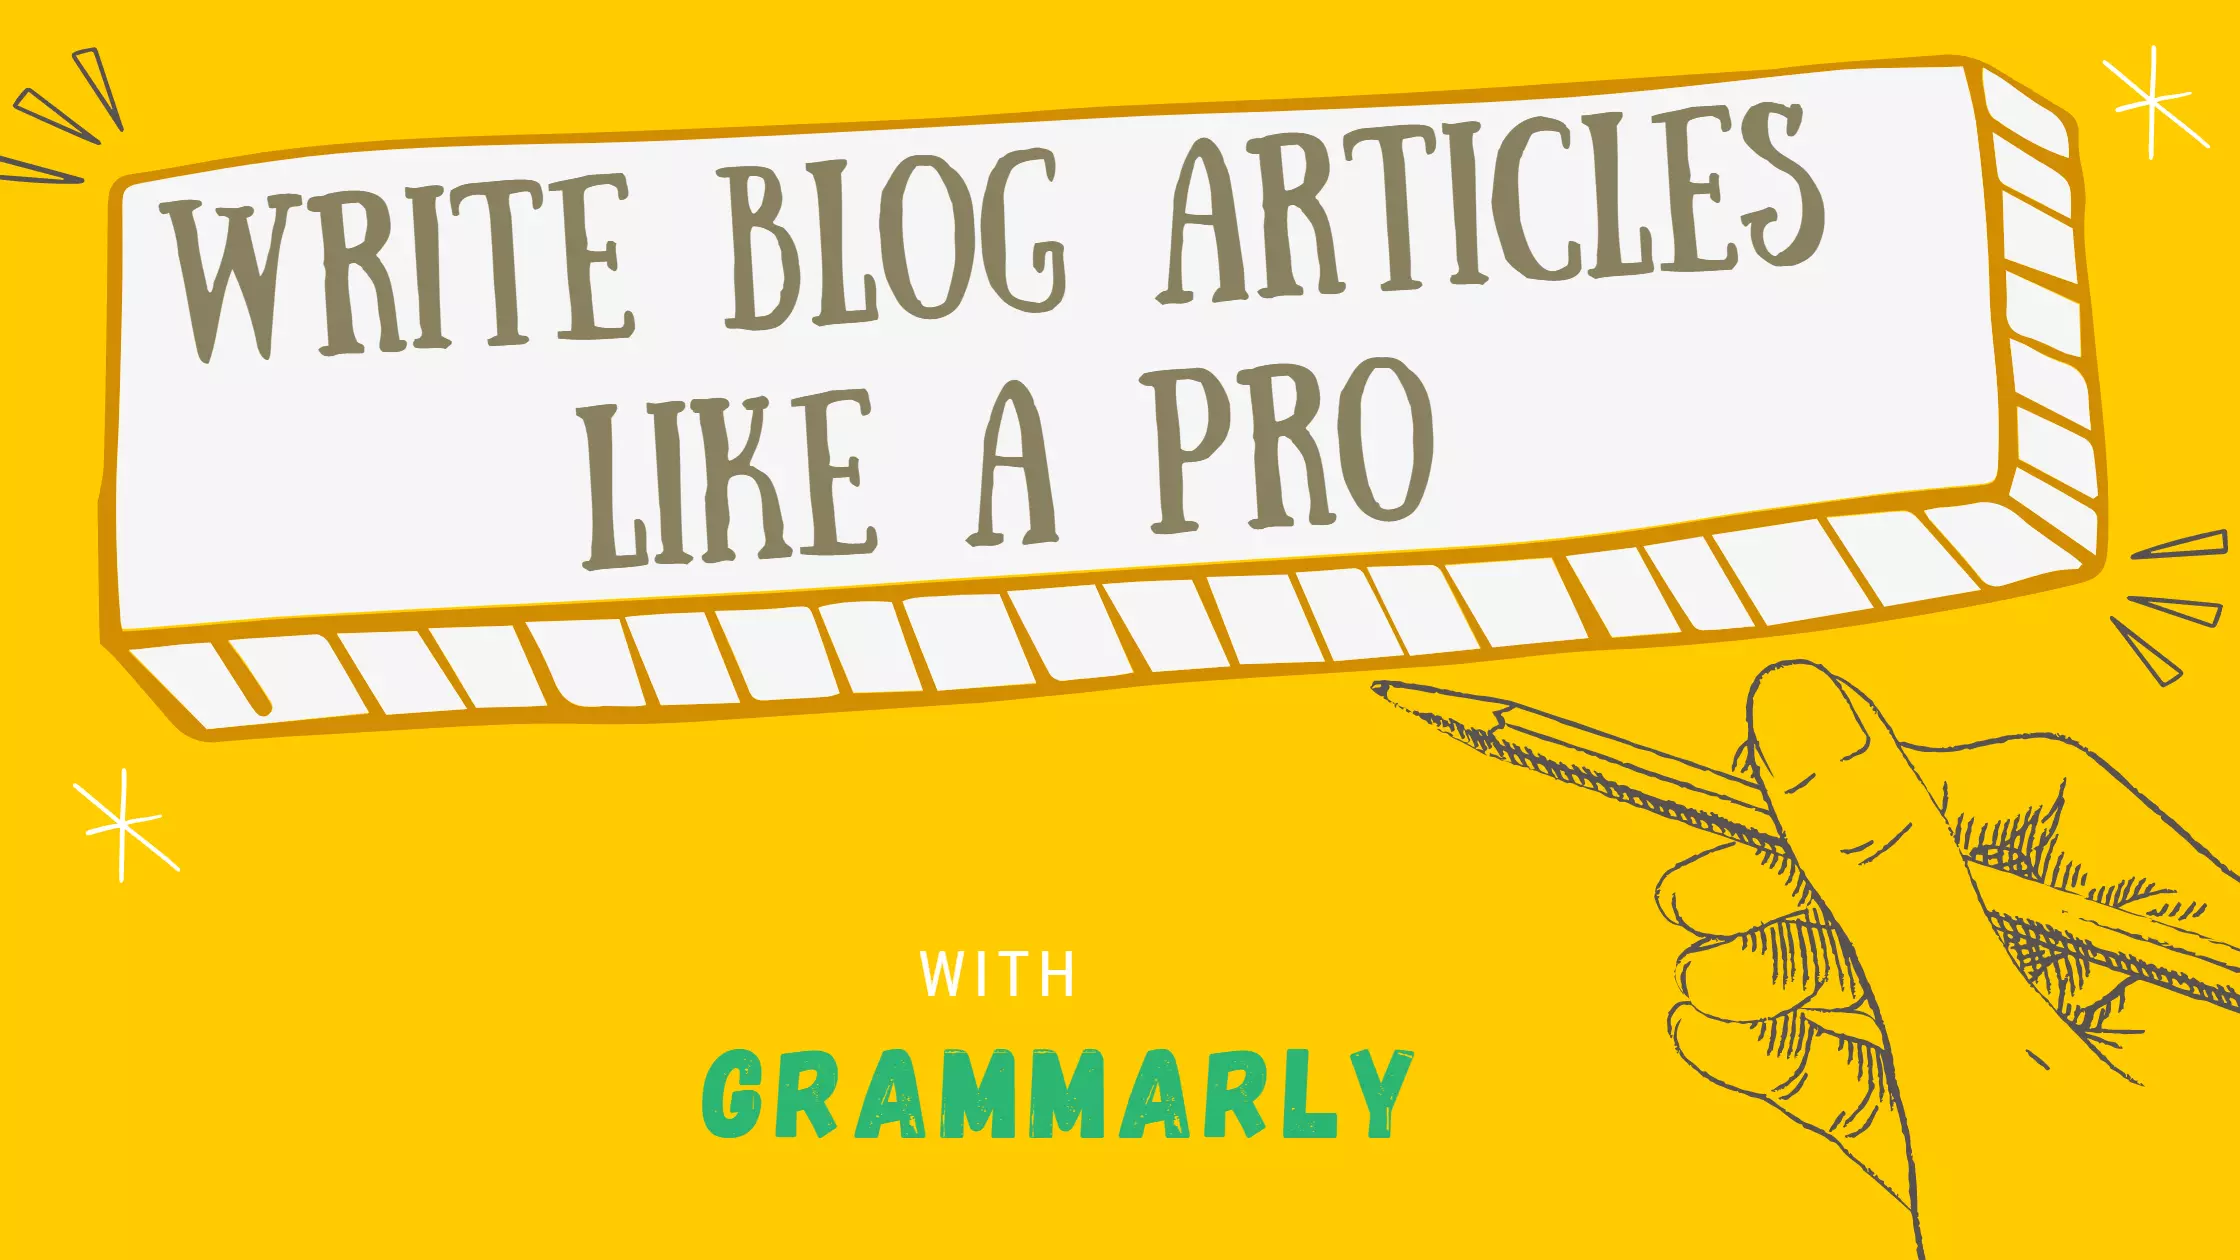 Learn how to write articles like a pro with grammarly